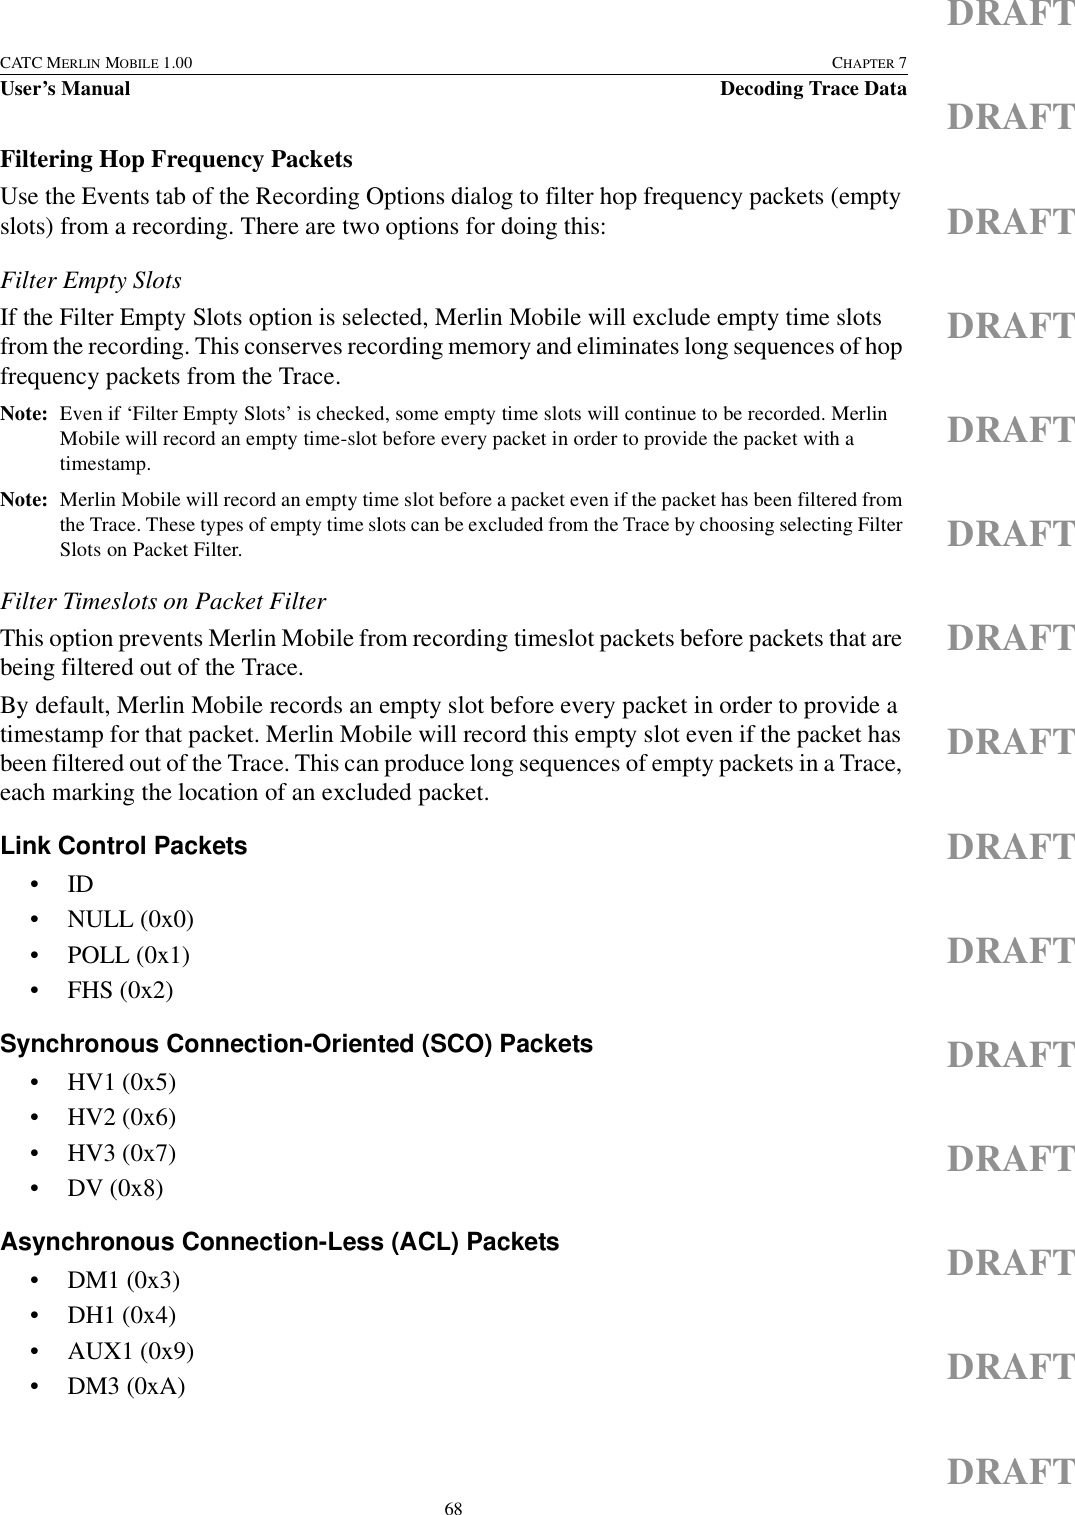 68CATC MERLIN MOBILE 1.00 CHAPTER 7User’s Manual Decoding Trace DataDRAFTDRAFTDRAFTDRAFTDRAFTDRAFTDRAFTDRAFTDRAFTDRAFTDRAFTDRAFTDRAFTDRAFTDRAFTFiltering Hop Frequency PacketsUse the Events tab of the Recording Options dialog to filter hop frequency packets (empty slots) from a recording. There are two options for doing this:Filter Empty SlotsIf the Filter Empty Slots option is selected, Merlin Mobile will exclude empty time slots from the recording. This conserves recording memory and eliminates long sequences of hop frequency packets from the Trace.Note: Even if ‘Filter Empty Slots’ is checked, some empty time slots will continue to be recorded. Merlin Mobile will record an empty time-slot before every packet in order to provide the packet with a timestamp. Note: Merlin Mobile will record an empty time slot before a packet even if the packet has been filtered from the Trace. These types of empty time slots can be excluded from the Trace by choosing selecting Filter Slots on Packet Filter.Filter Timeslots on Packet FilterThis option prevents Merlin Mobile from recording timeslot packets before packets that are being filtered out of the Trace.By default, Merlin Mobile records an empty slot before every packet in order to provide a timestamp for that packet. Merlin Mobile will record this empty slot even if the packet has been filtered out of the Trace. This can produce long sequences of empty packets in a Trace, each marking the location of an excluded packet. Link Control Packets•ID• NULL (0x0)• POLL (0x1)• FHS (0x2)Synchronous Connection-Oriented (SCO) Packets• HV1 (0x5)• HV2 (0x6)• HV3 (0x7)• DV (0x8)Asynchronous Connection-Less (ACL) Packets• DM1 (0x3)• DH1 (0x4)• AUX1 (0x9)• DM3 (0xA)